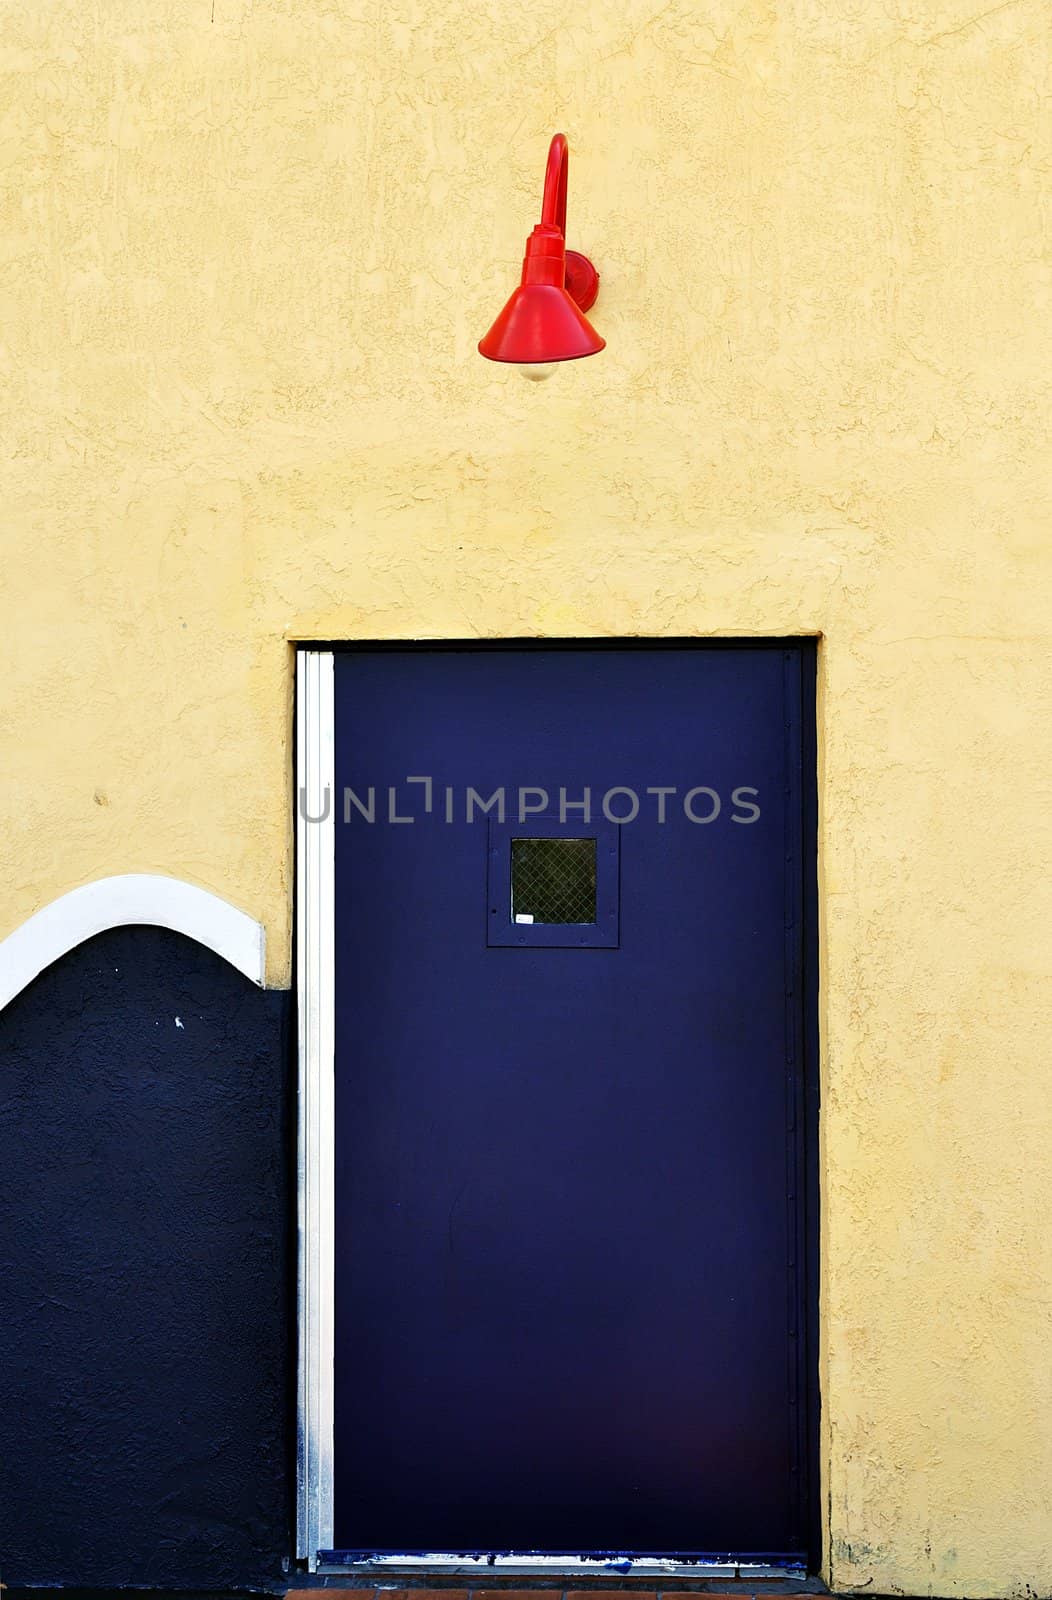 Blue commercial backdoor with red lamp above it.